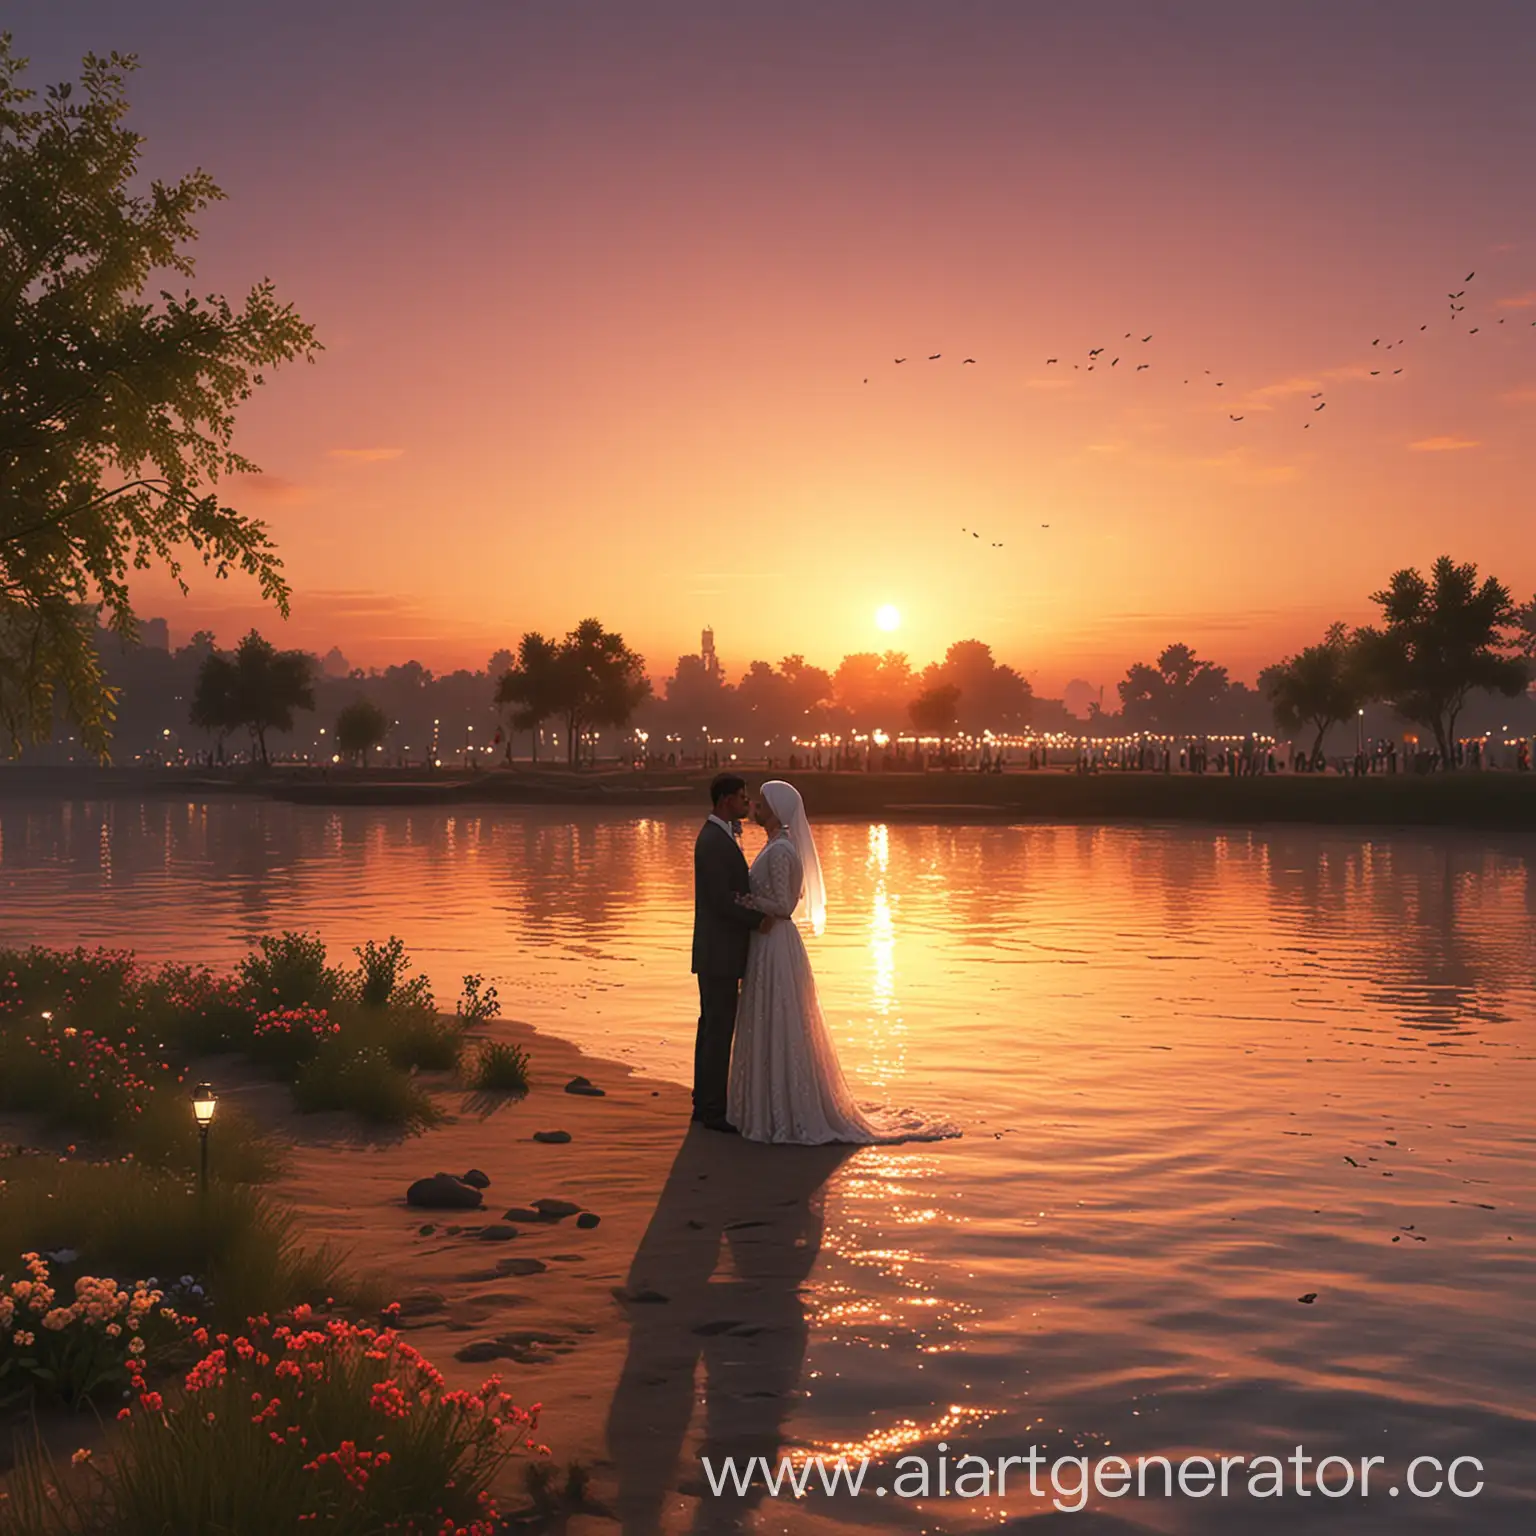 Animated-Muslim-Wedding-Ceremony-at-Sunset-by-the-Riverbank